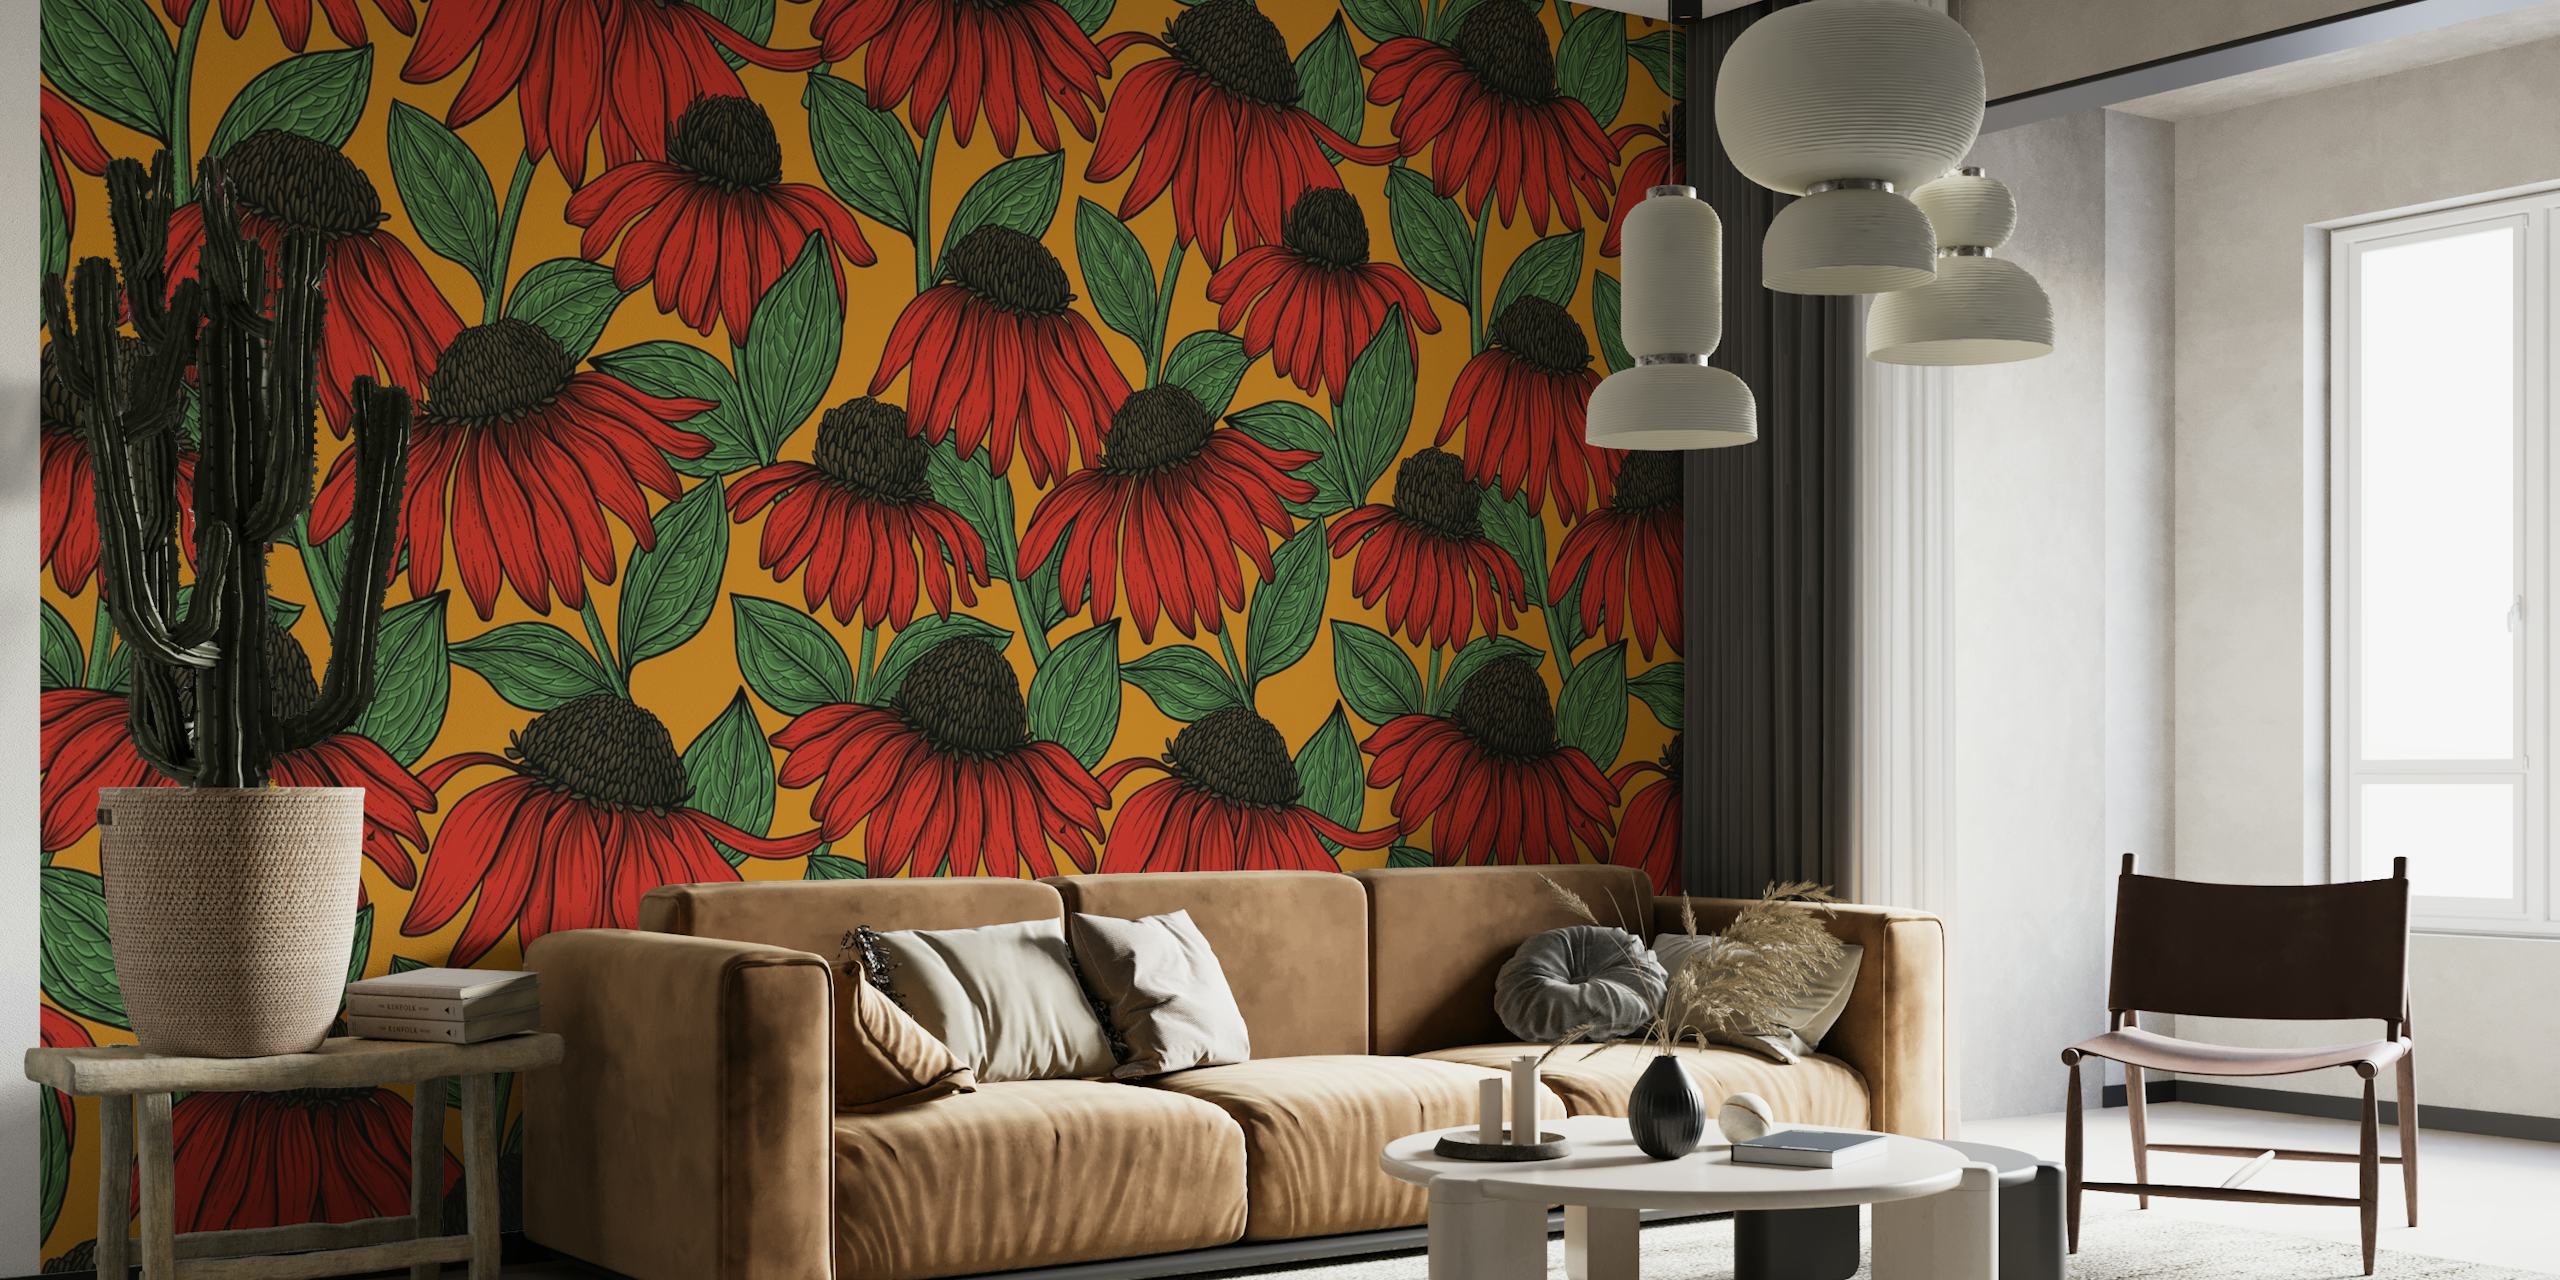 Wall mural of red coneflowers with lush green foliage on a dark background